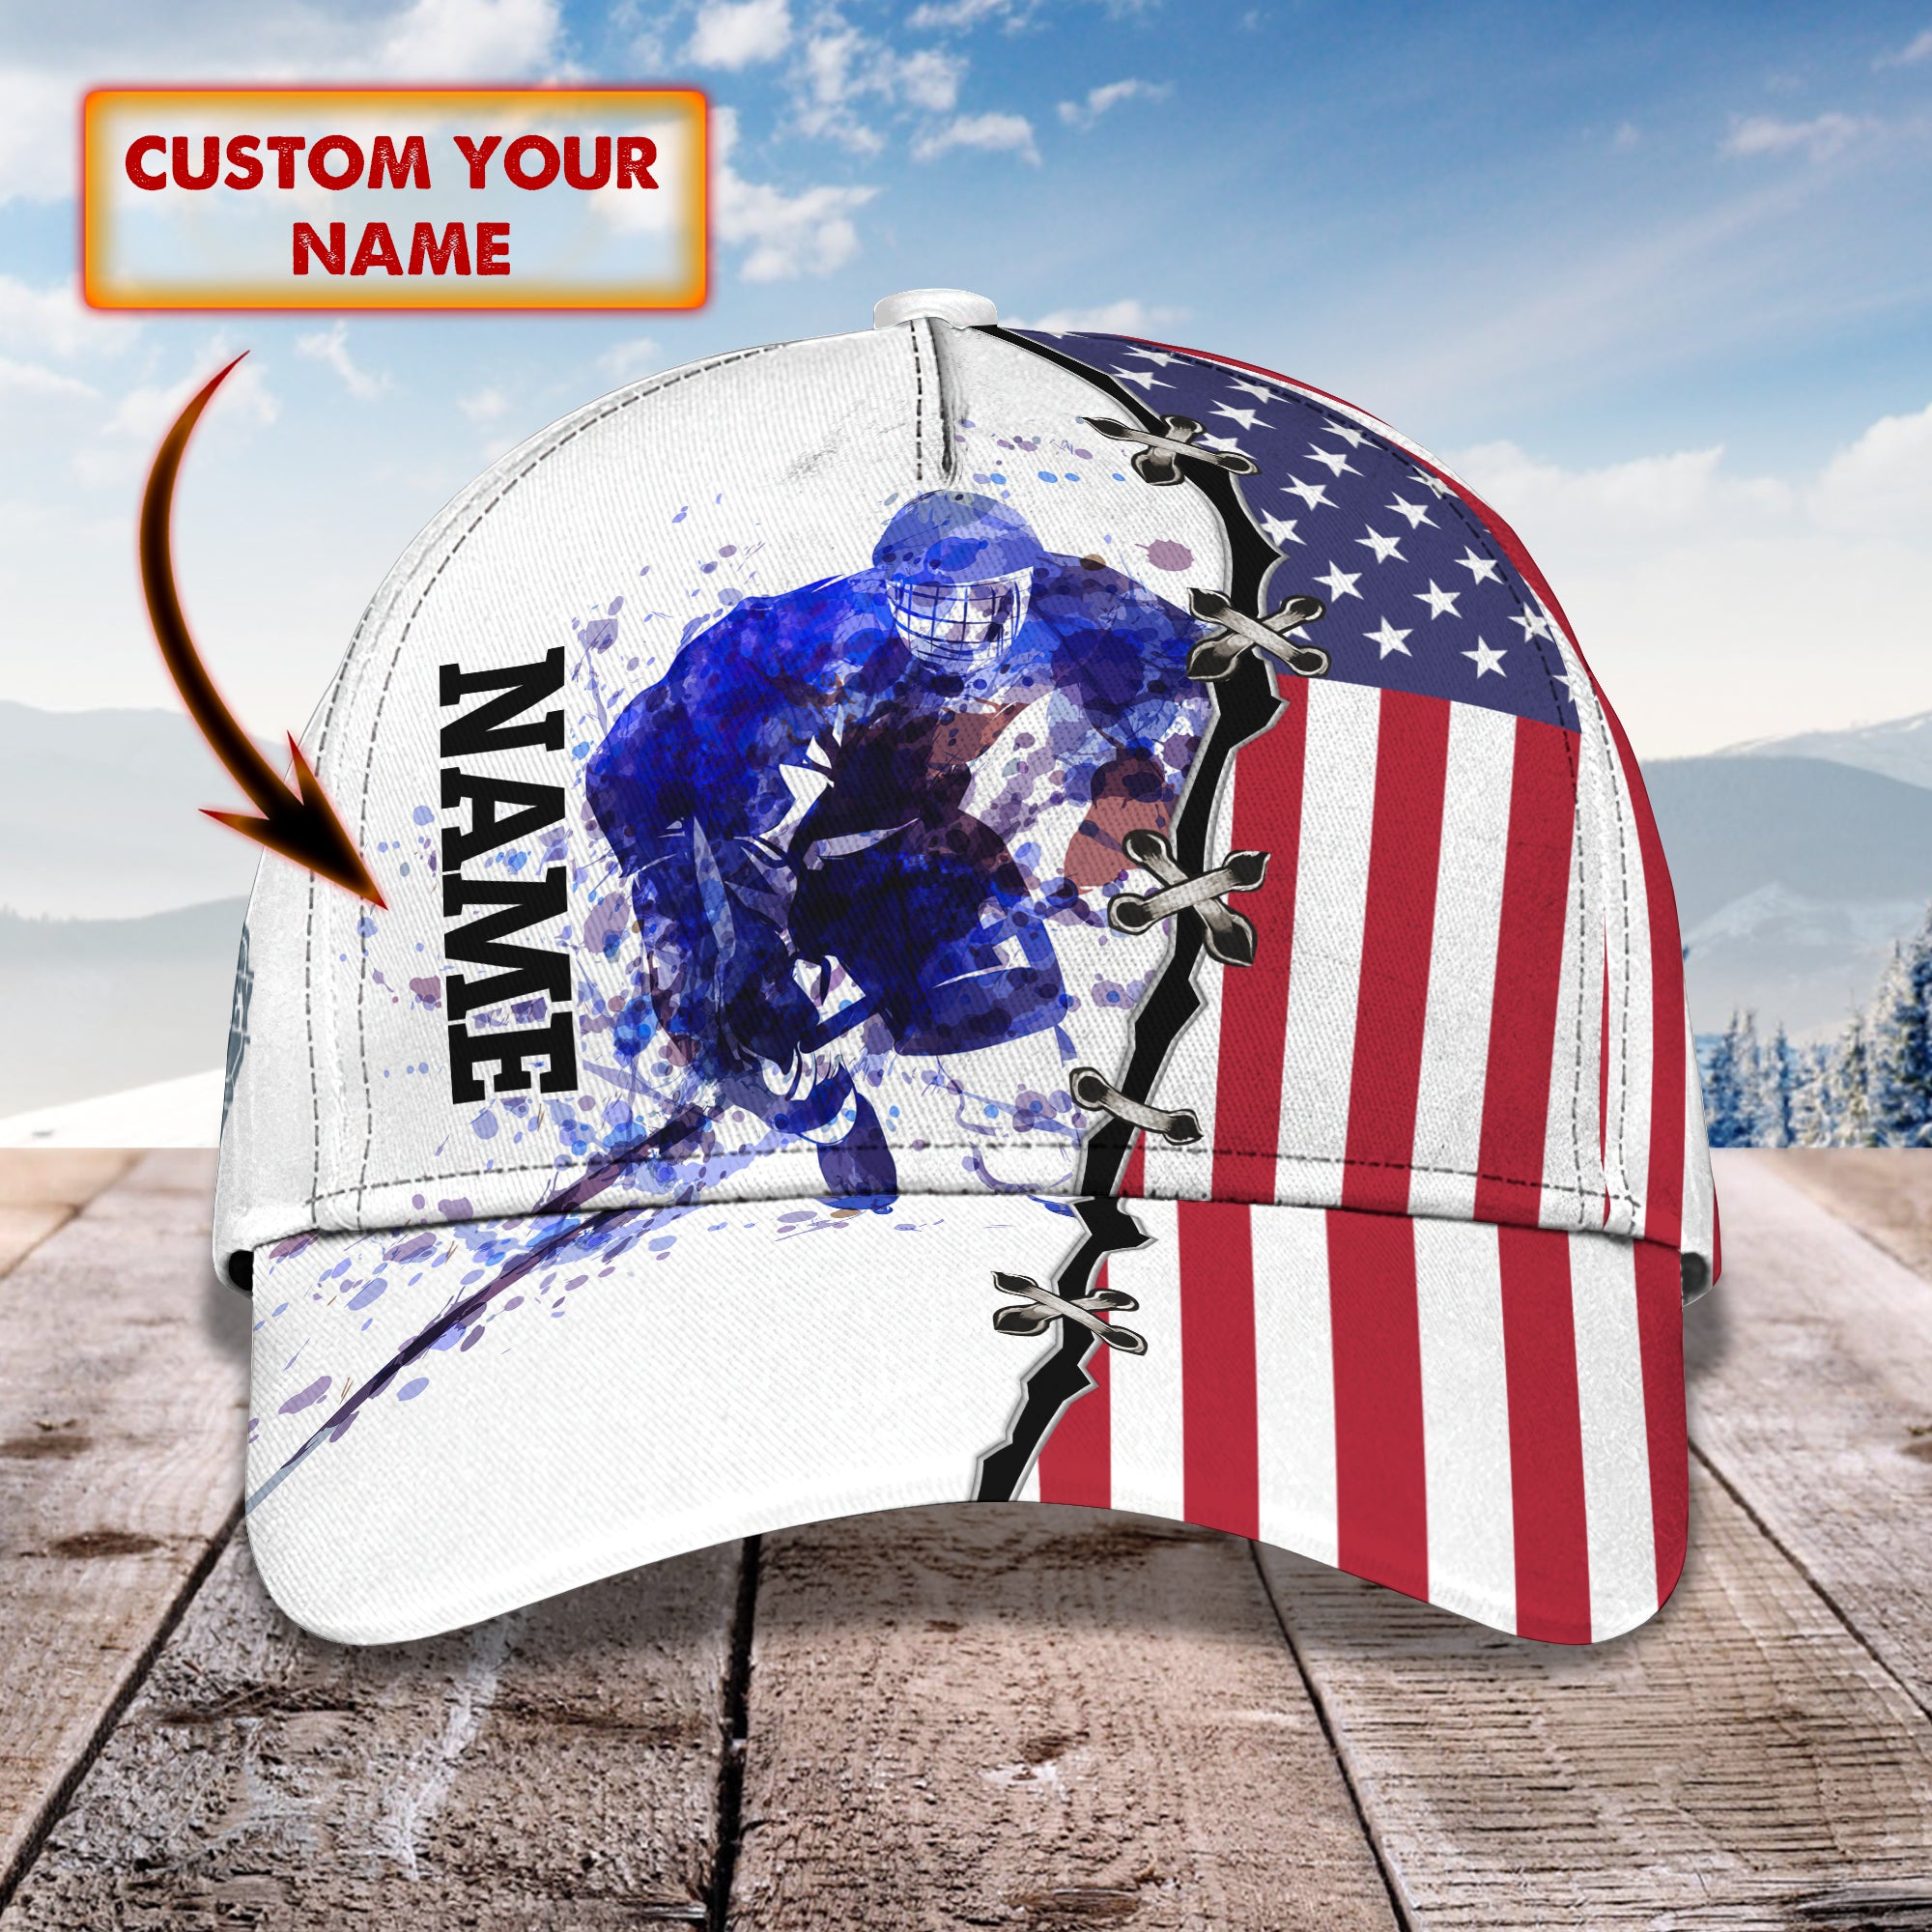 In A Hockey Game- Personalized Name Cap - Loop- T2k-210